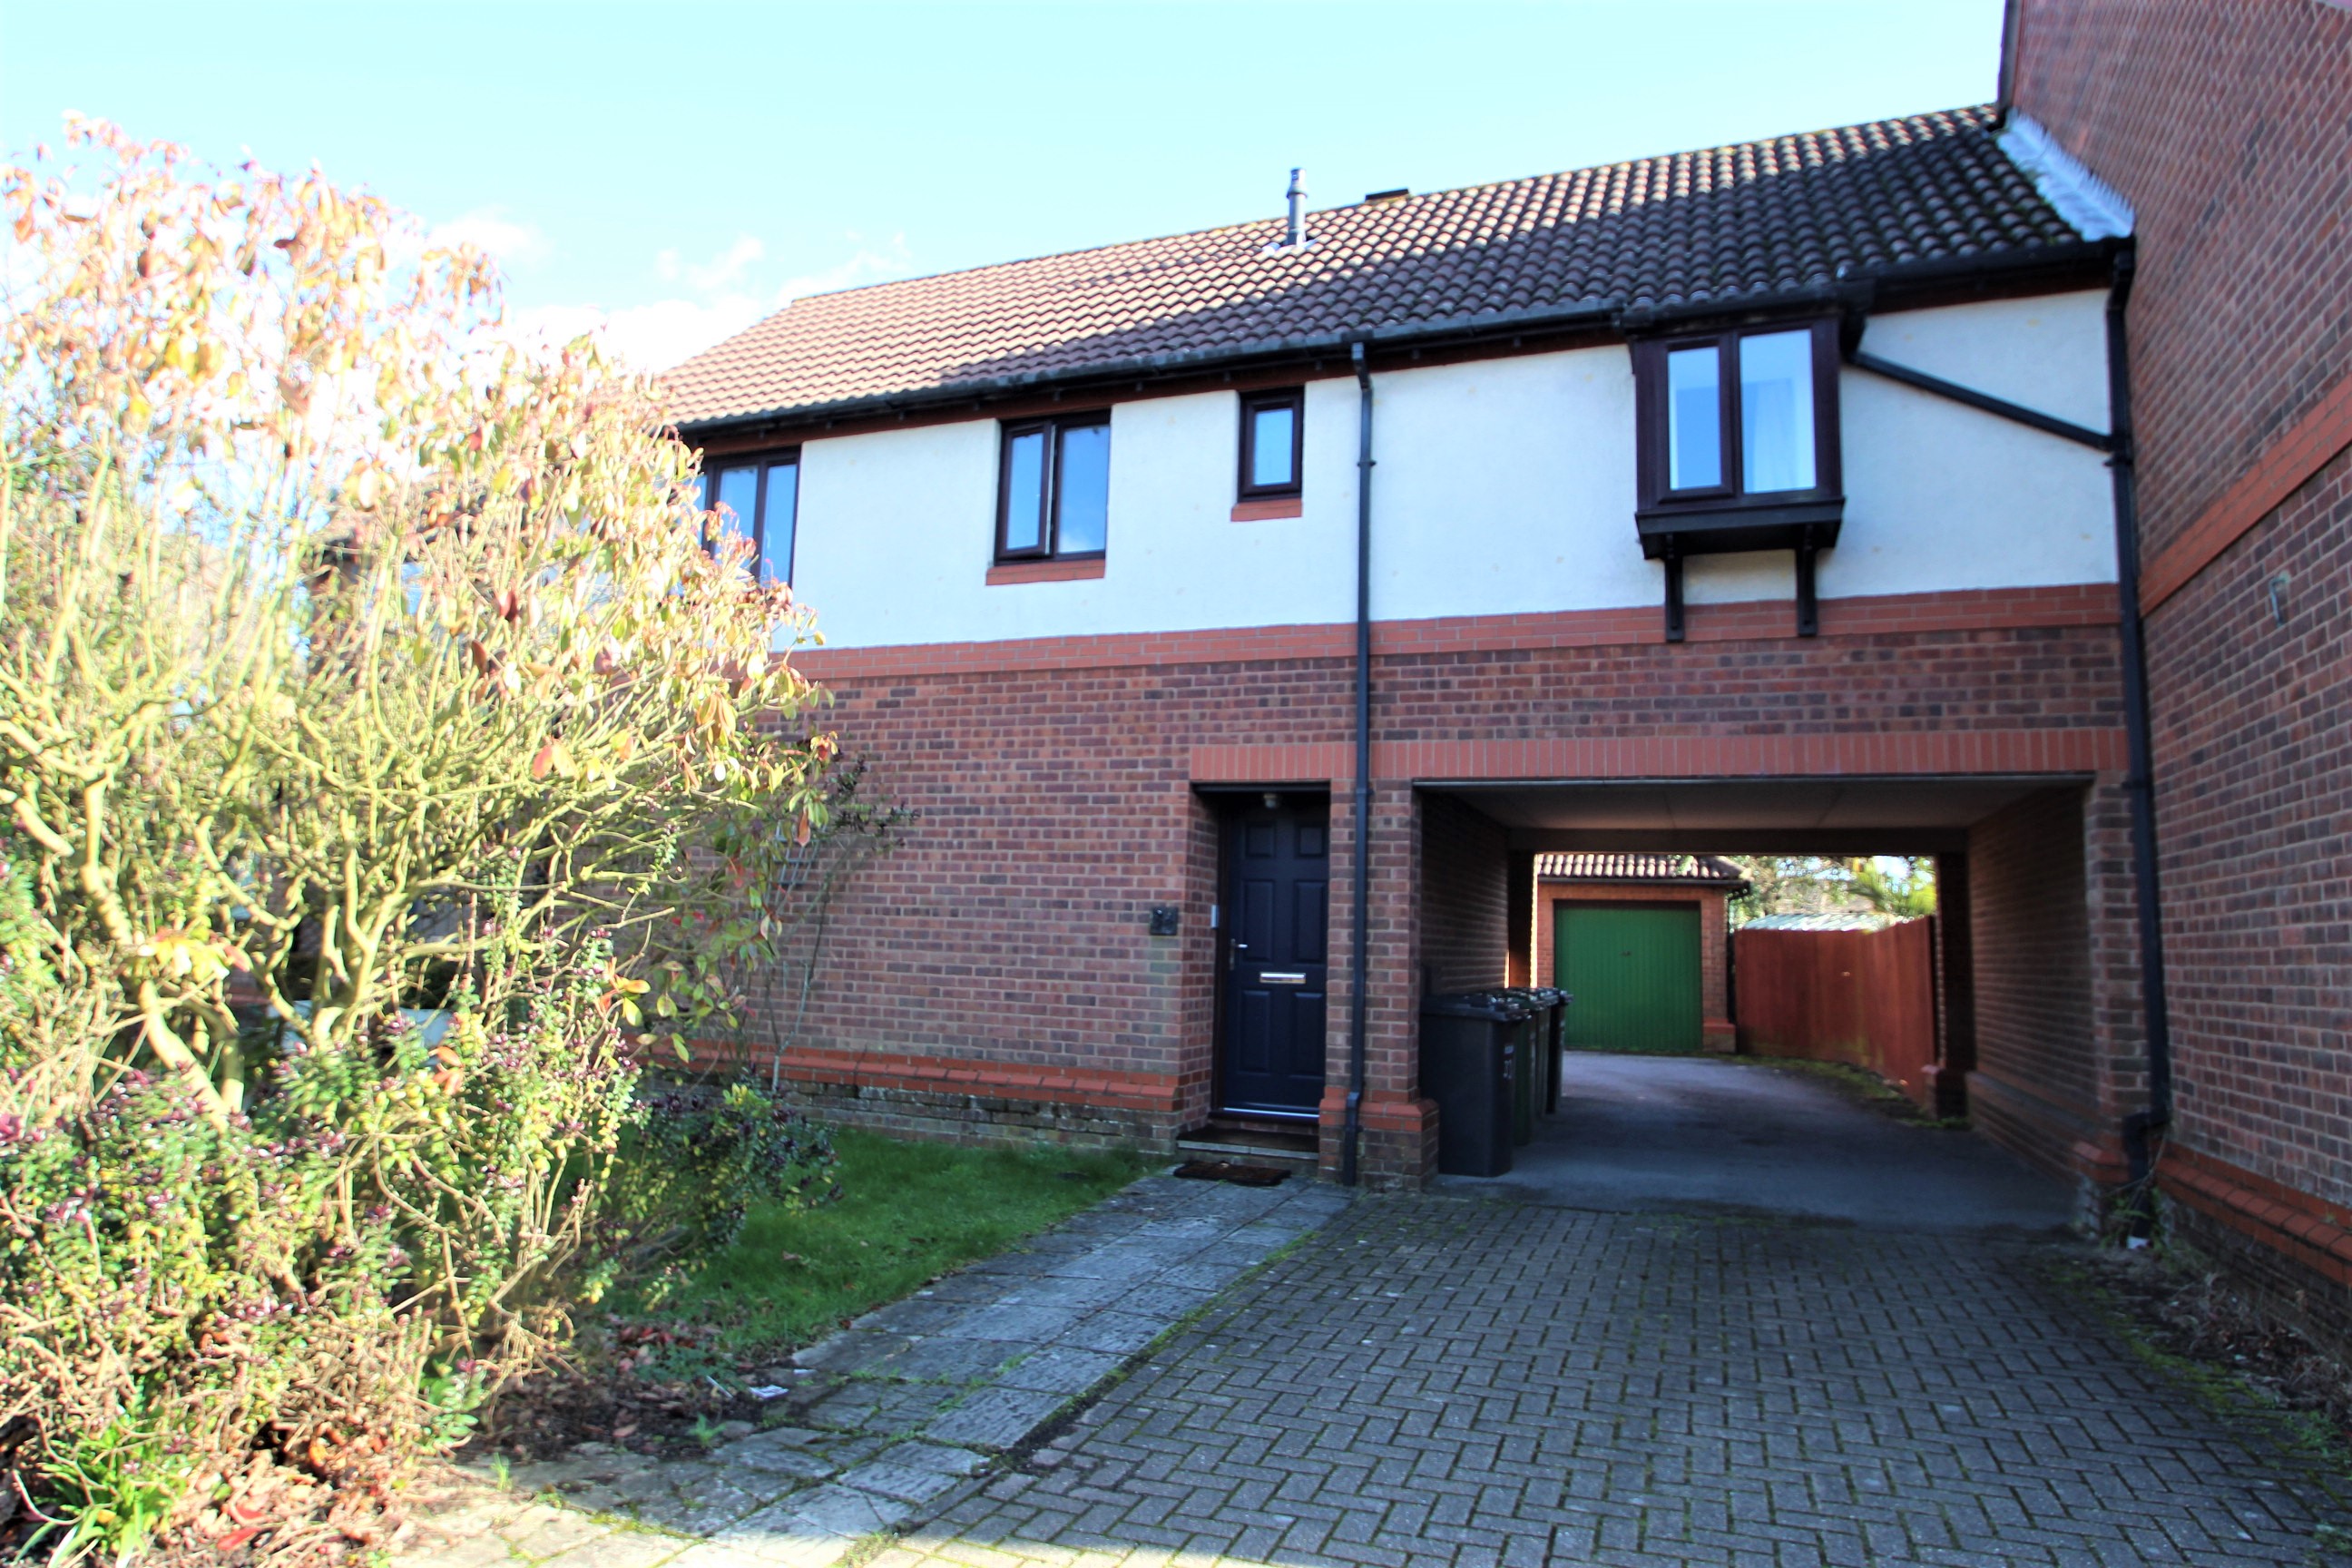 2 bed Flat for rent in Hamble-le-Rice. From Lets Rent Southampton - Lettings